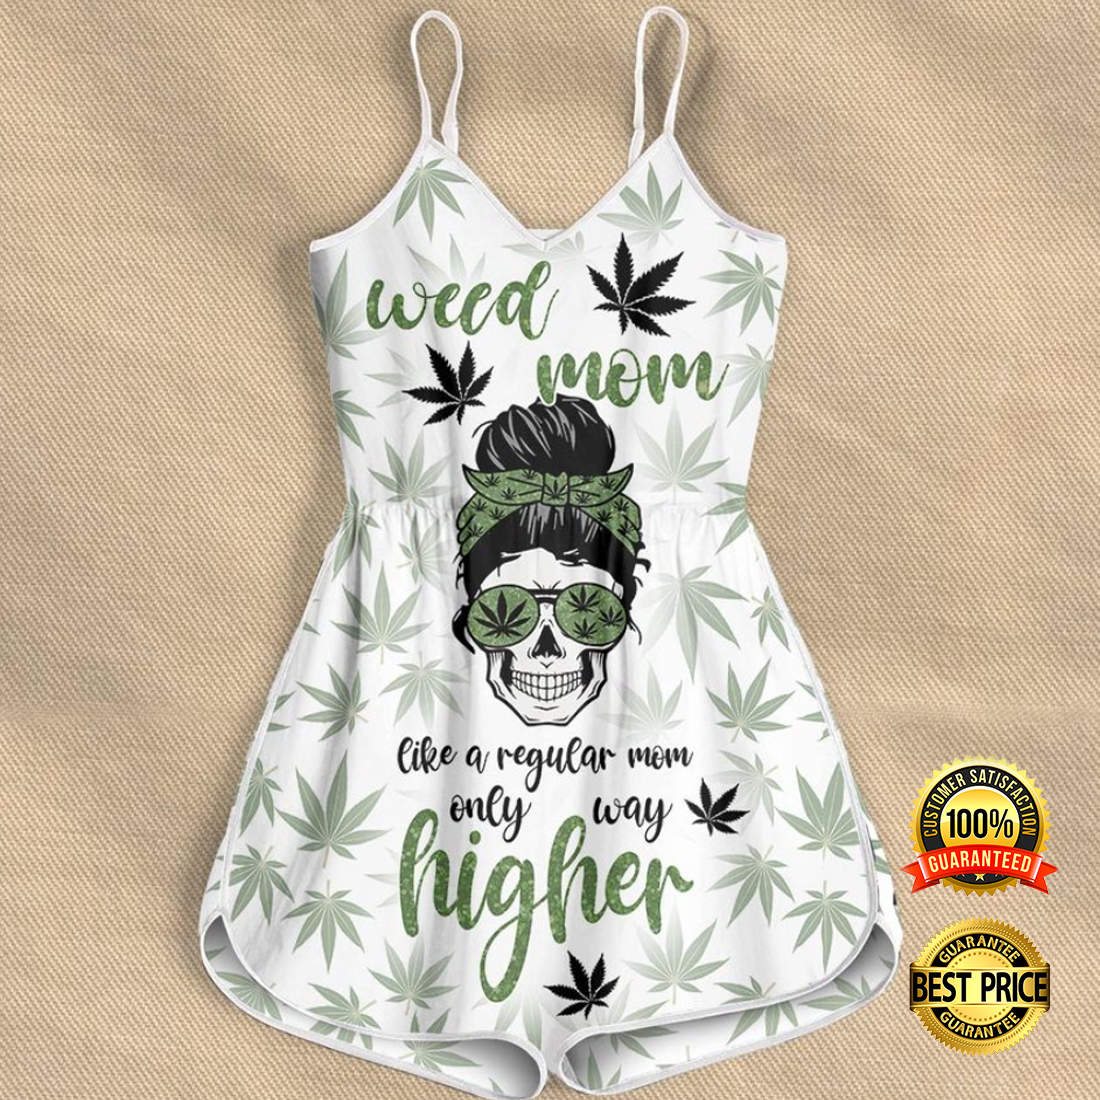 Weed mom like a regular mom only way higher romper